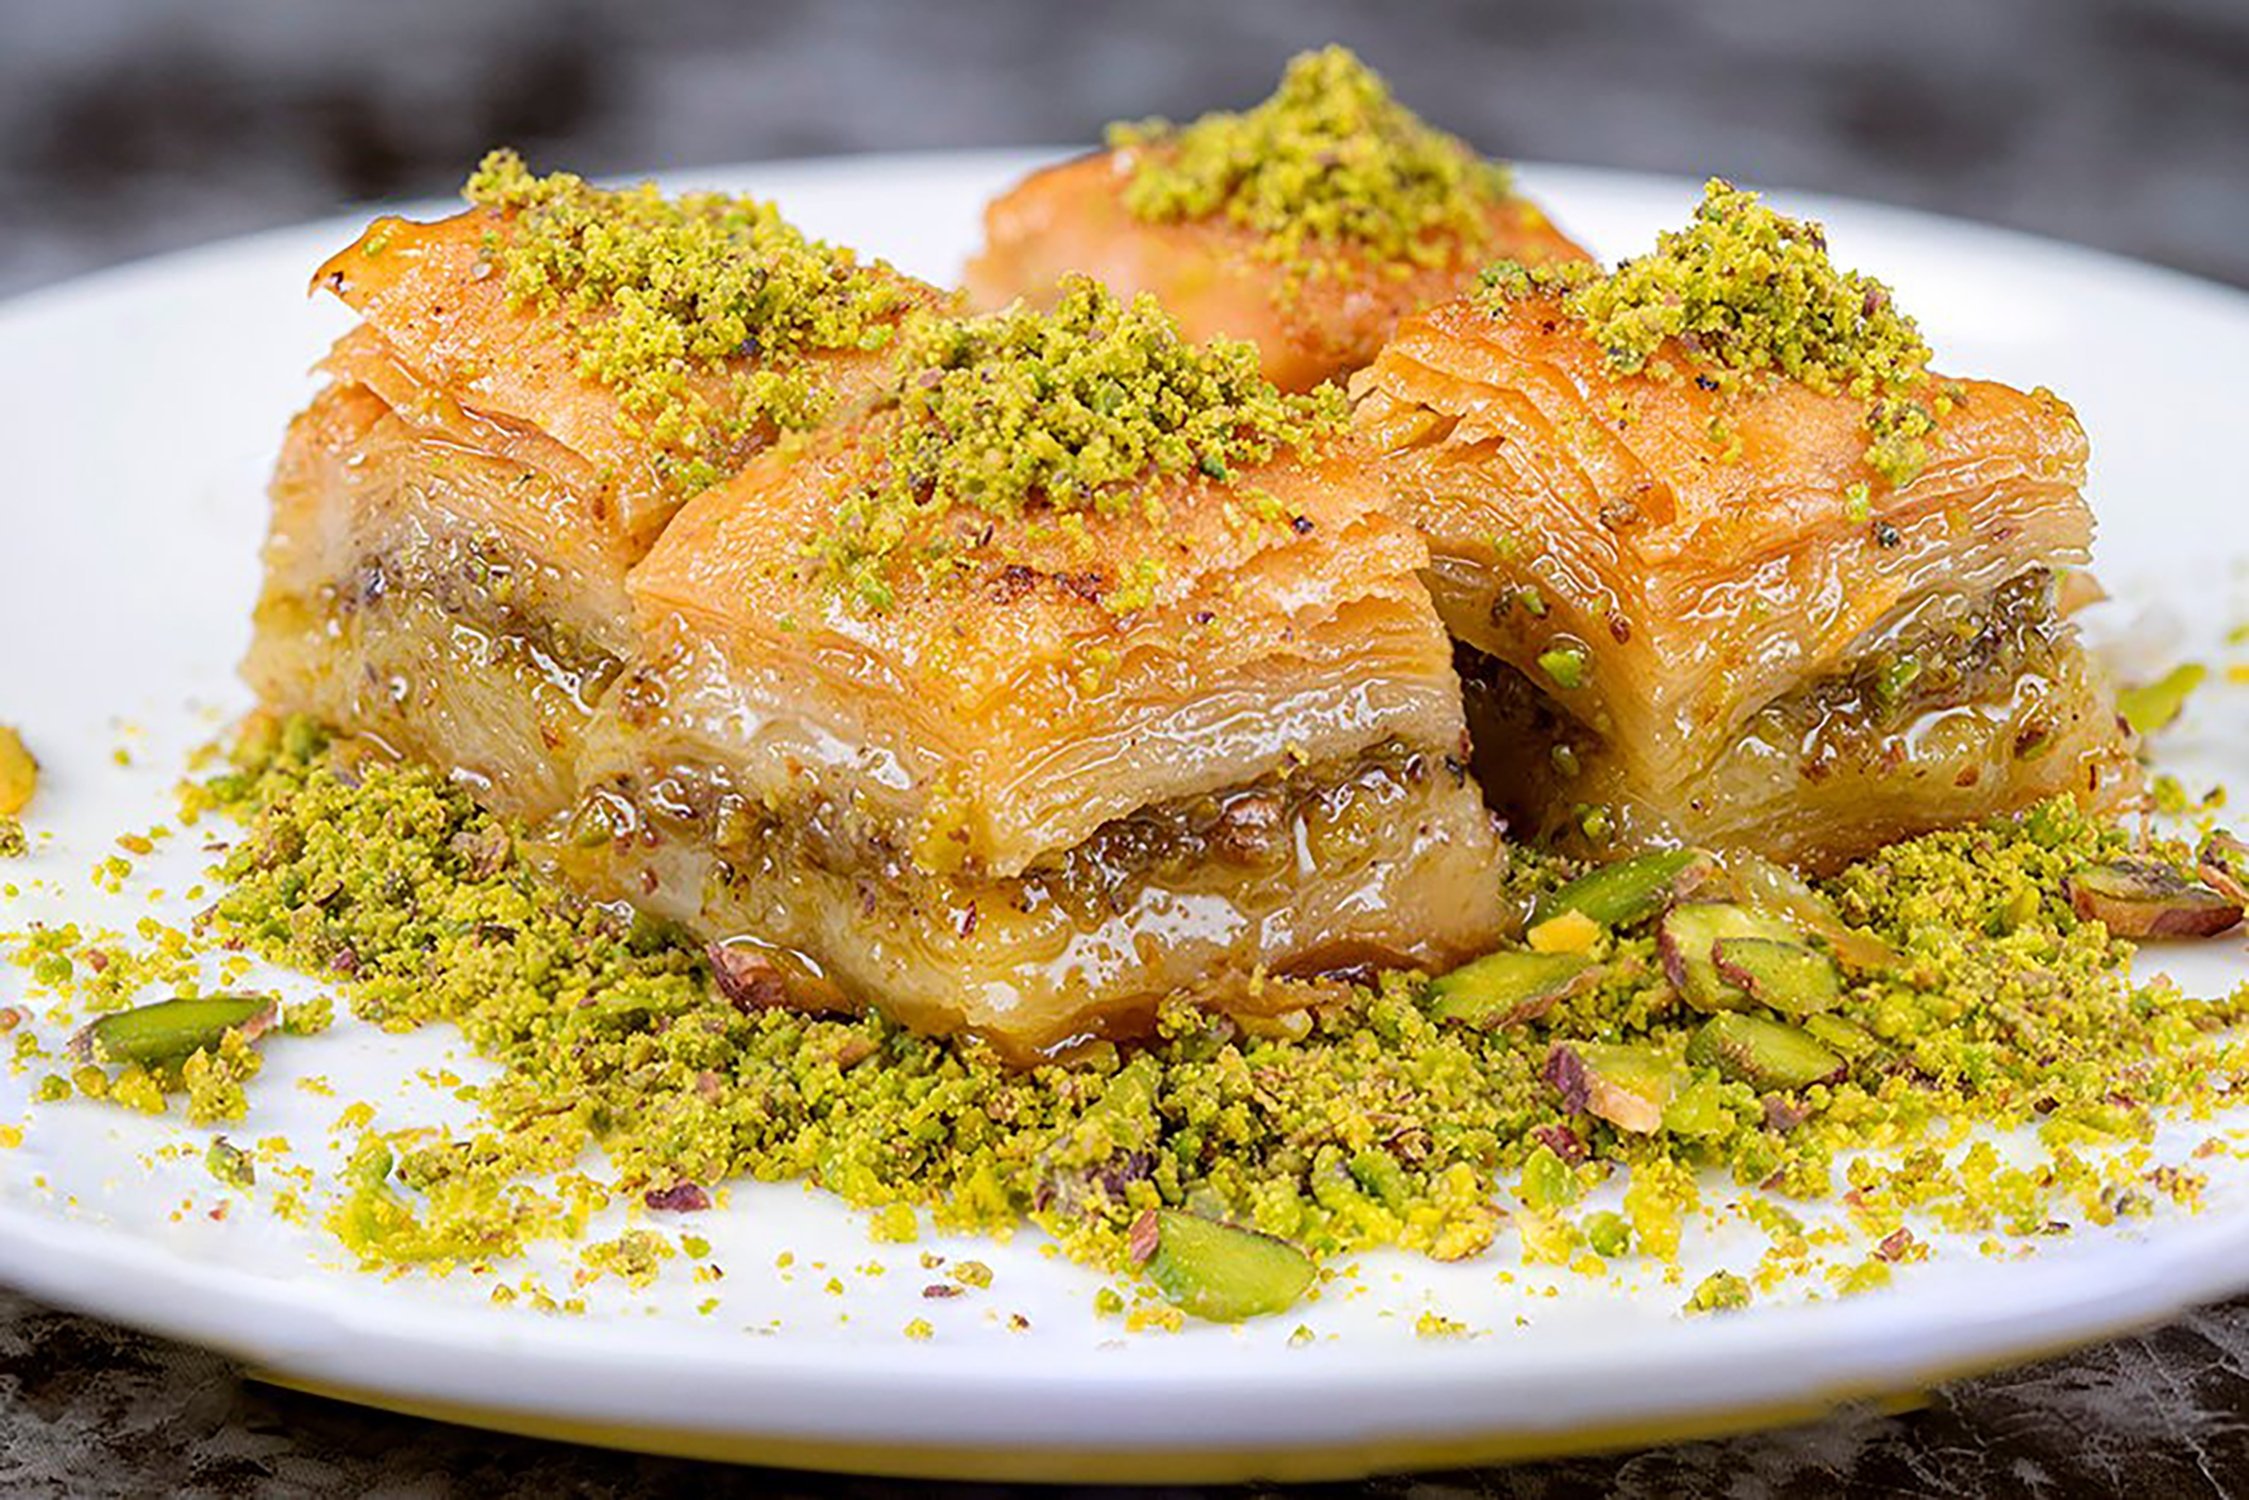 Delicious Turkish baklava rises in popularity in India | Daily Sabah